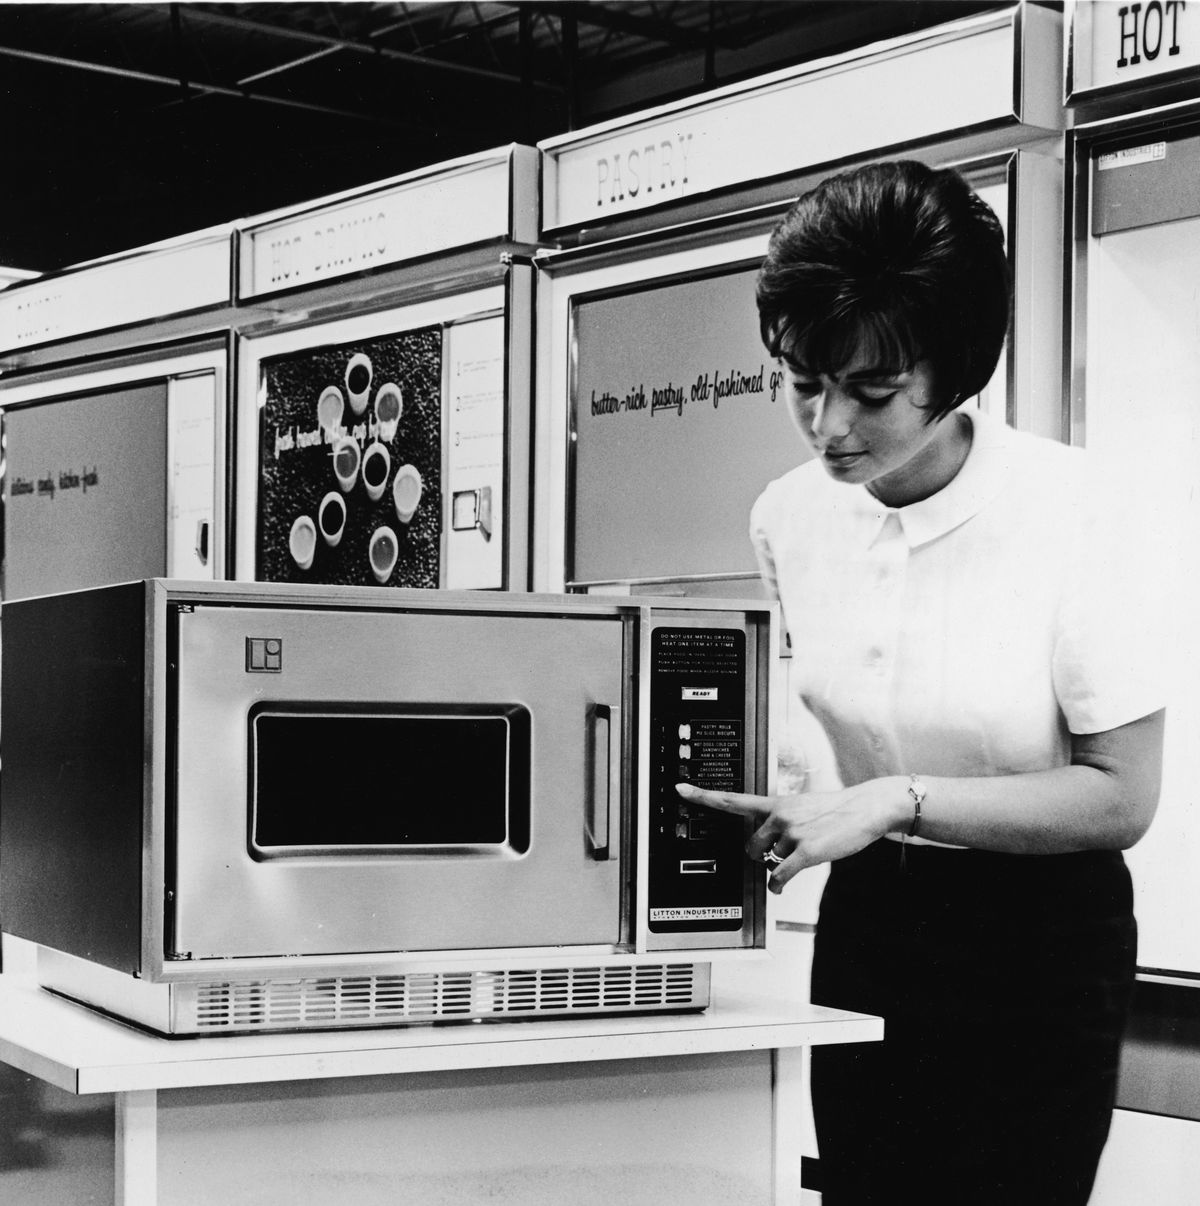 https://hips.hearstapps.com/hmg-prod/images/woman-demonstrates-a-litton-series-500-microwave-oven-on-a-news-photo-1629226033.jpg?crop=1.00xw:0.801xh;0,0.0421xh&resize=1200:*